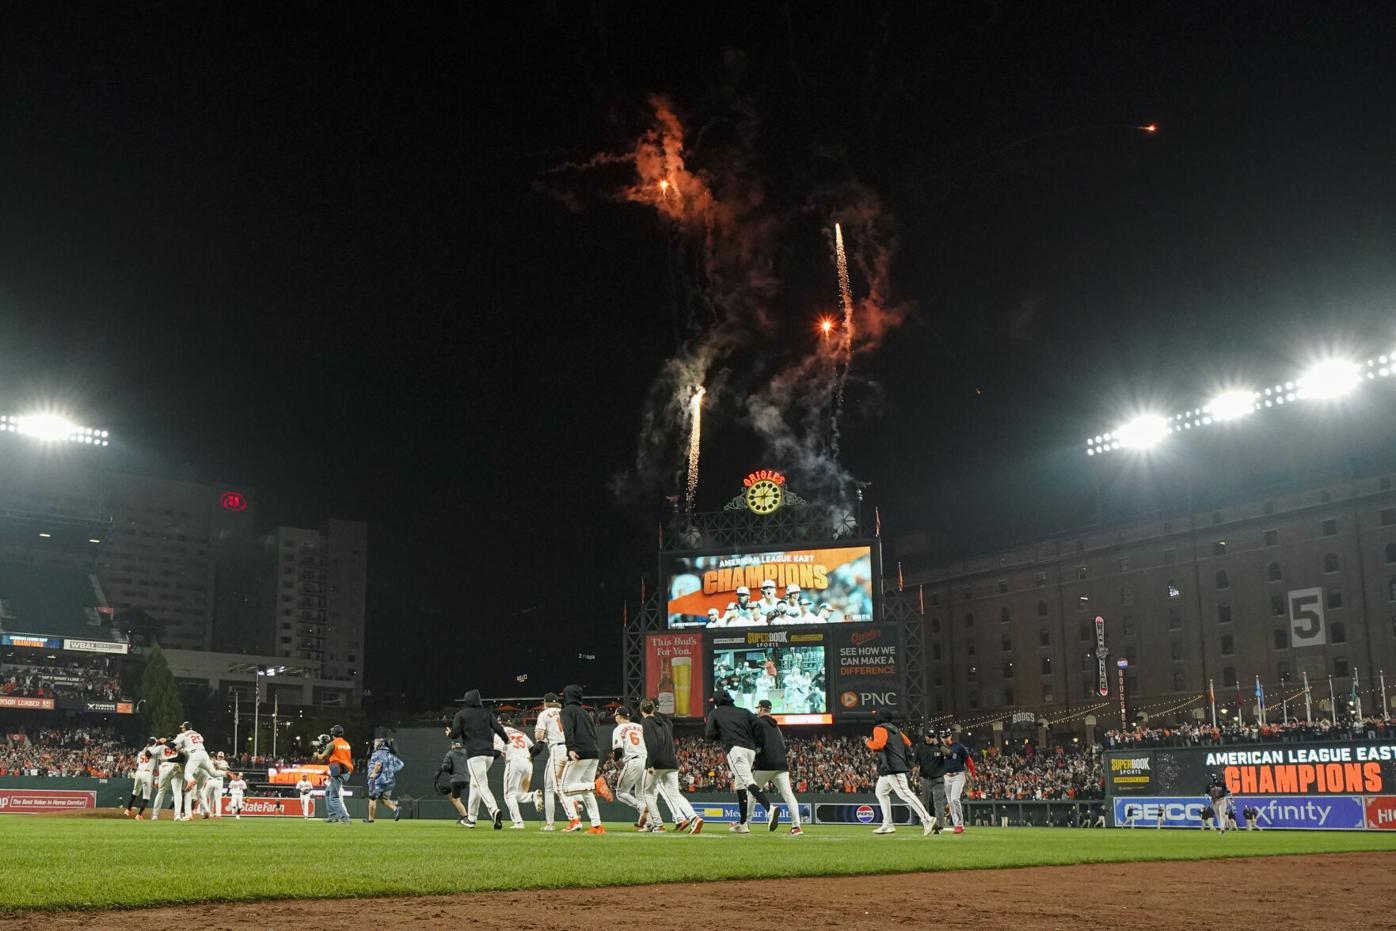 Lack of fans at Camden Yards costs Maryland millions in rent